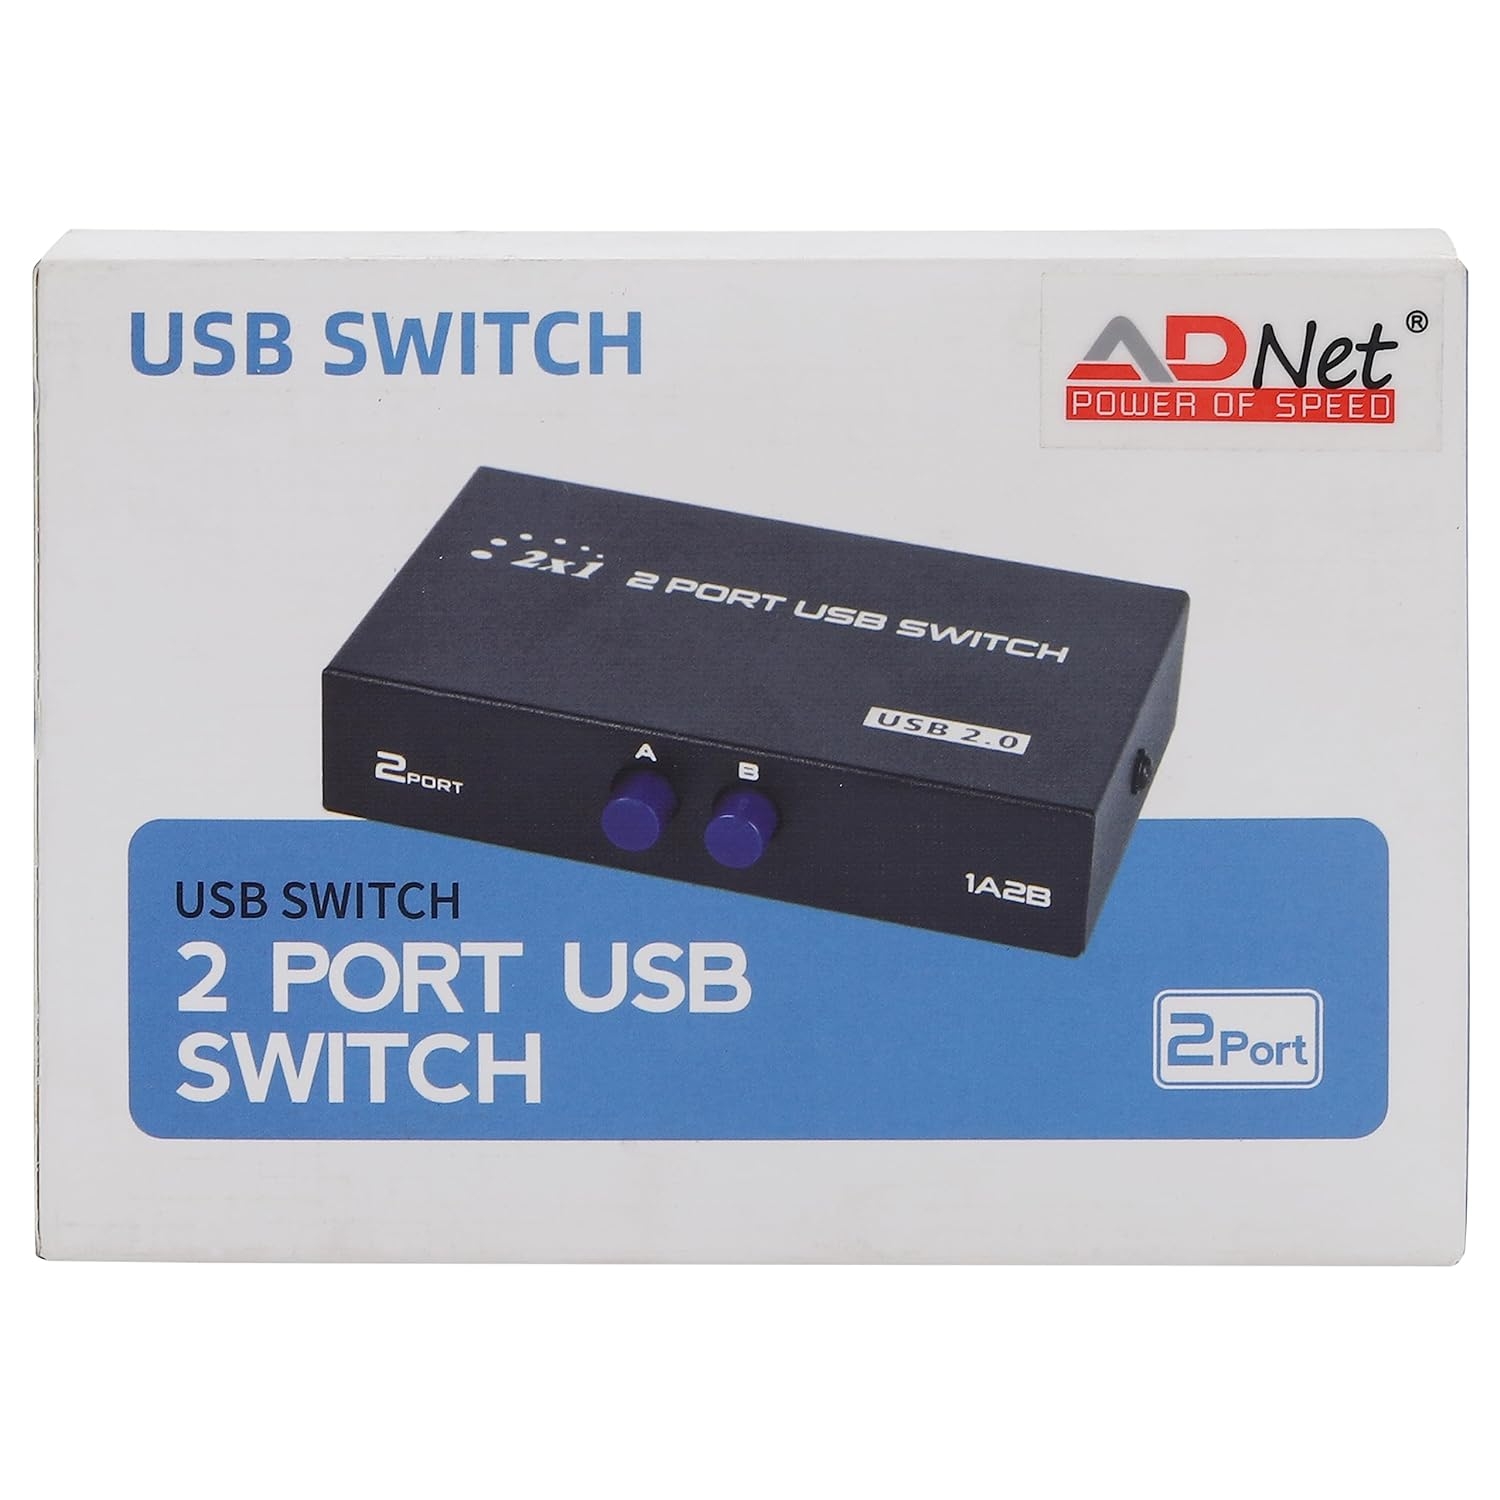 ADNet Printer Sharing USB Switch 2 Ports USB 2.0 Selector Switch Box for 2 PC Share 1 USB Device Printer PC Computer Scanner Printers (Black)